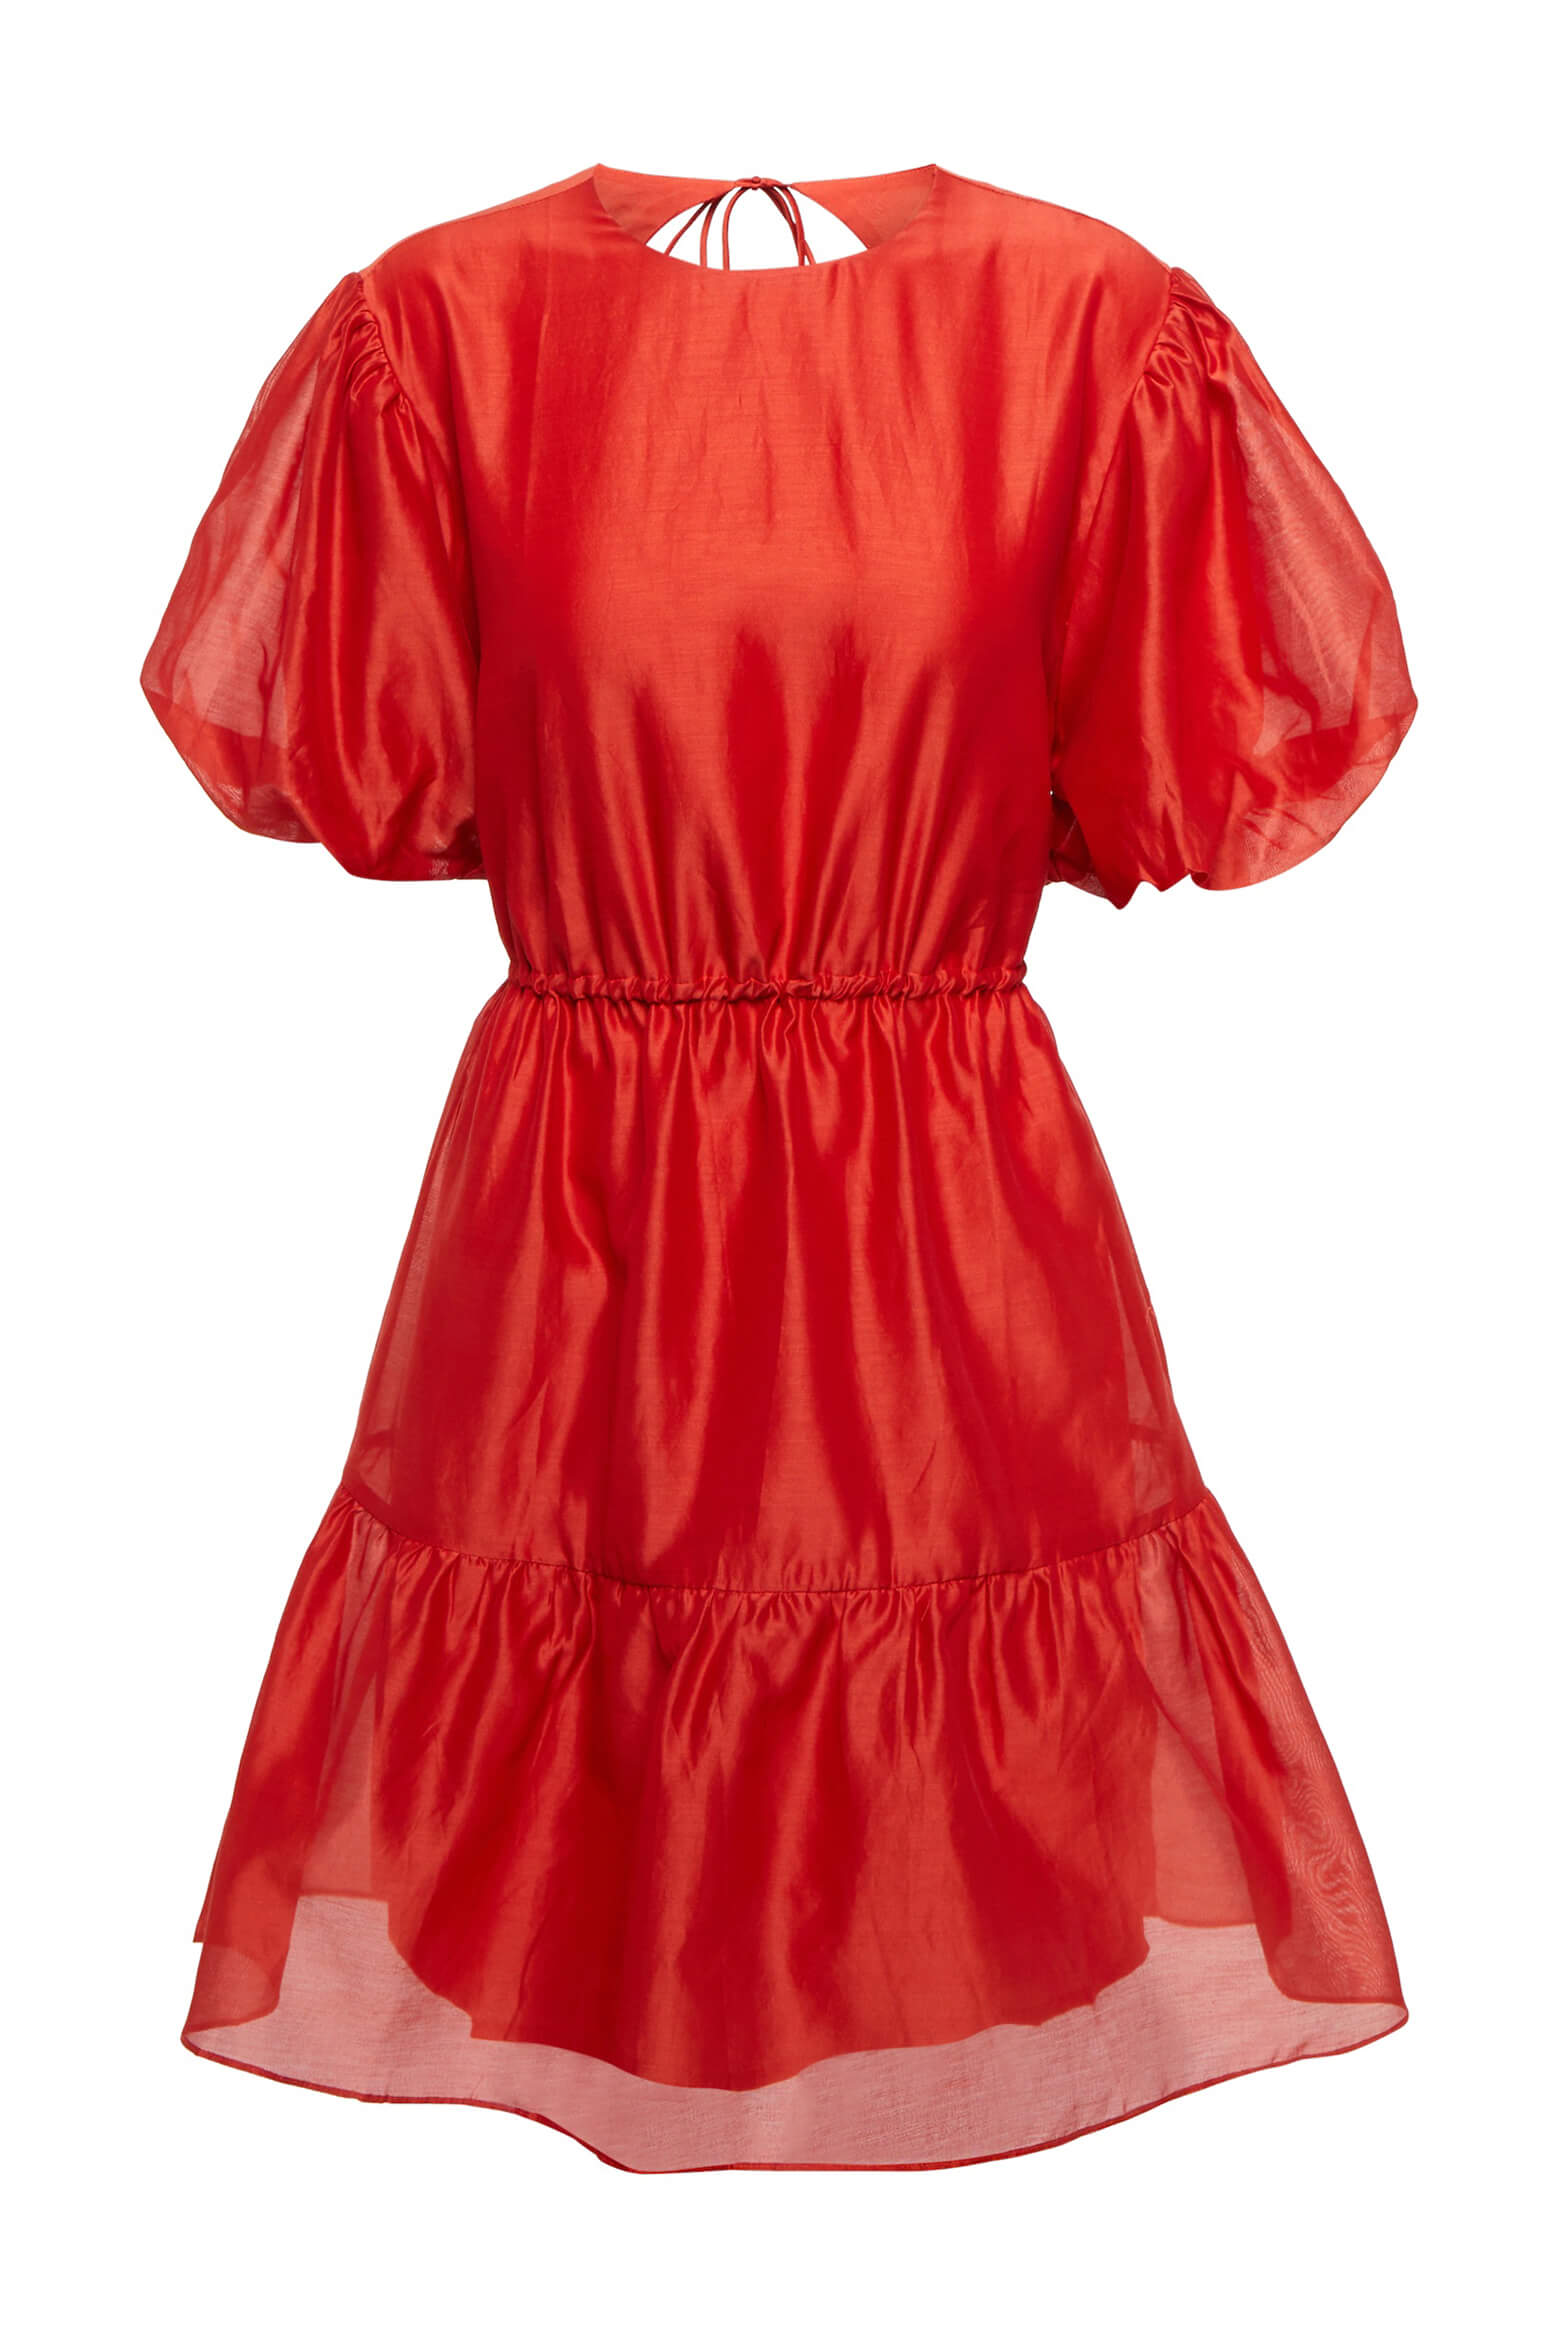 Sir Lucelia Puff Sleeve Mini Dress in Red from The New Trend